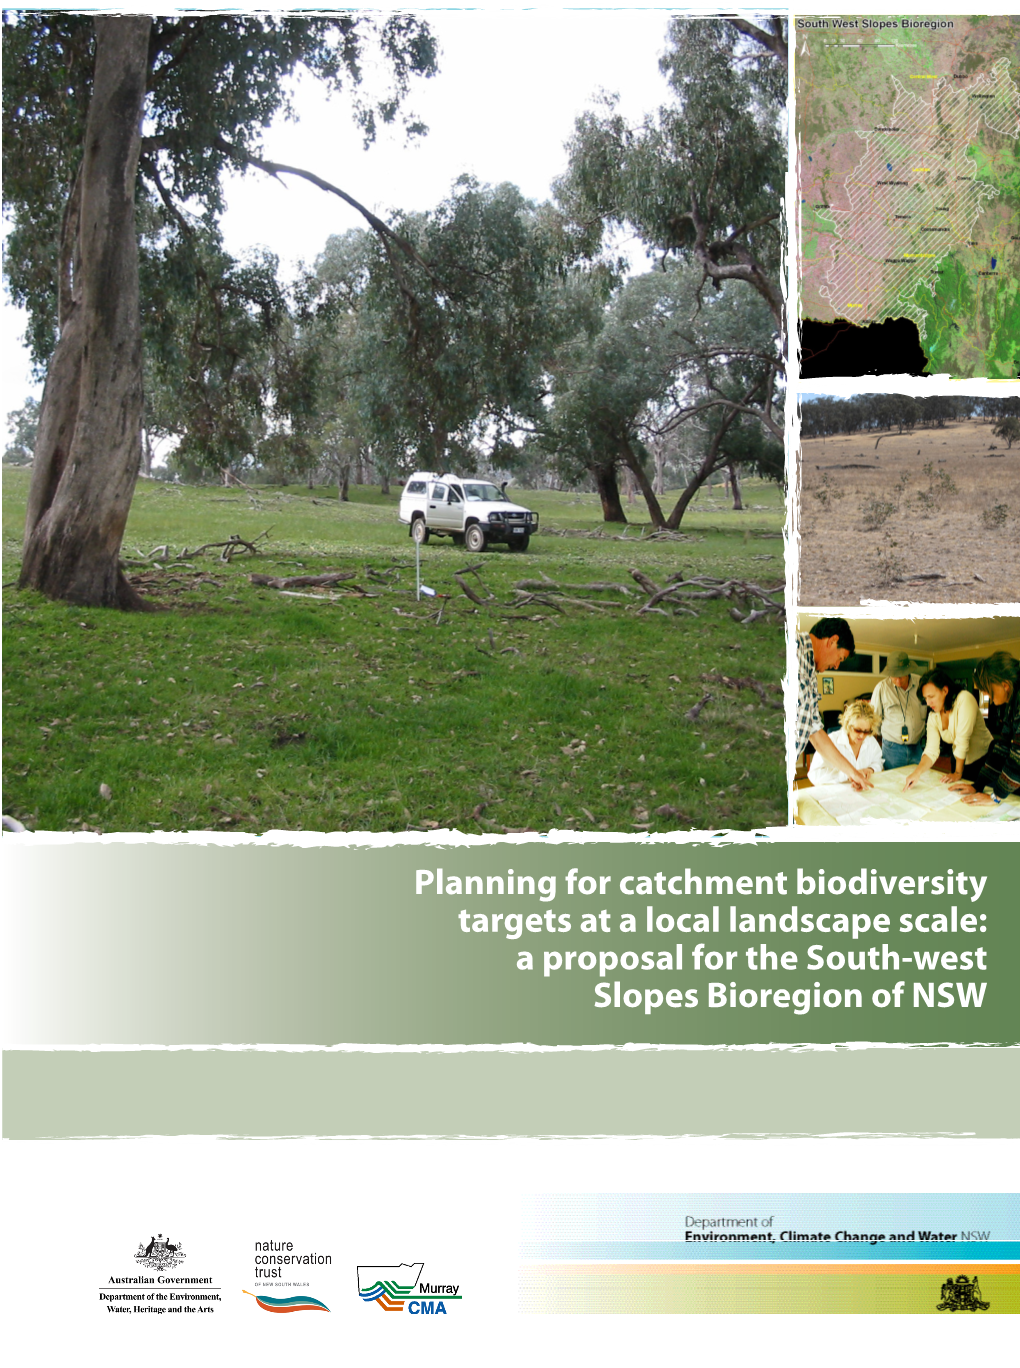 Biodiversity Planning for Local Landscapes